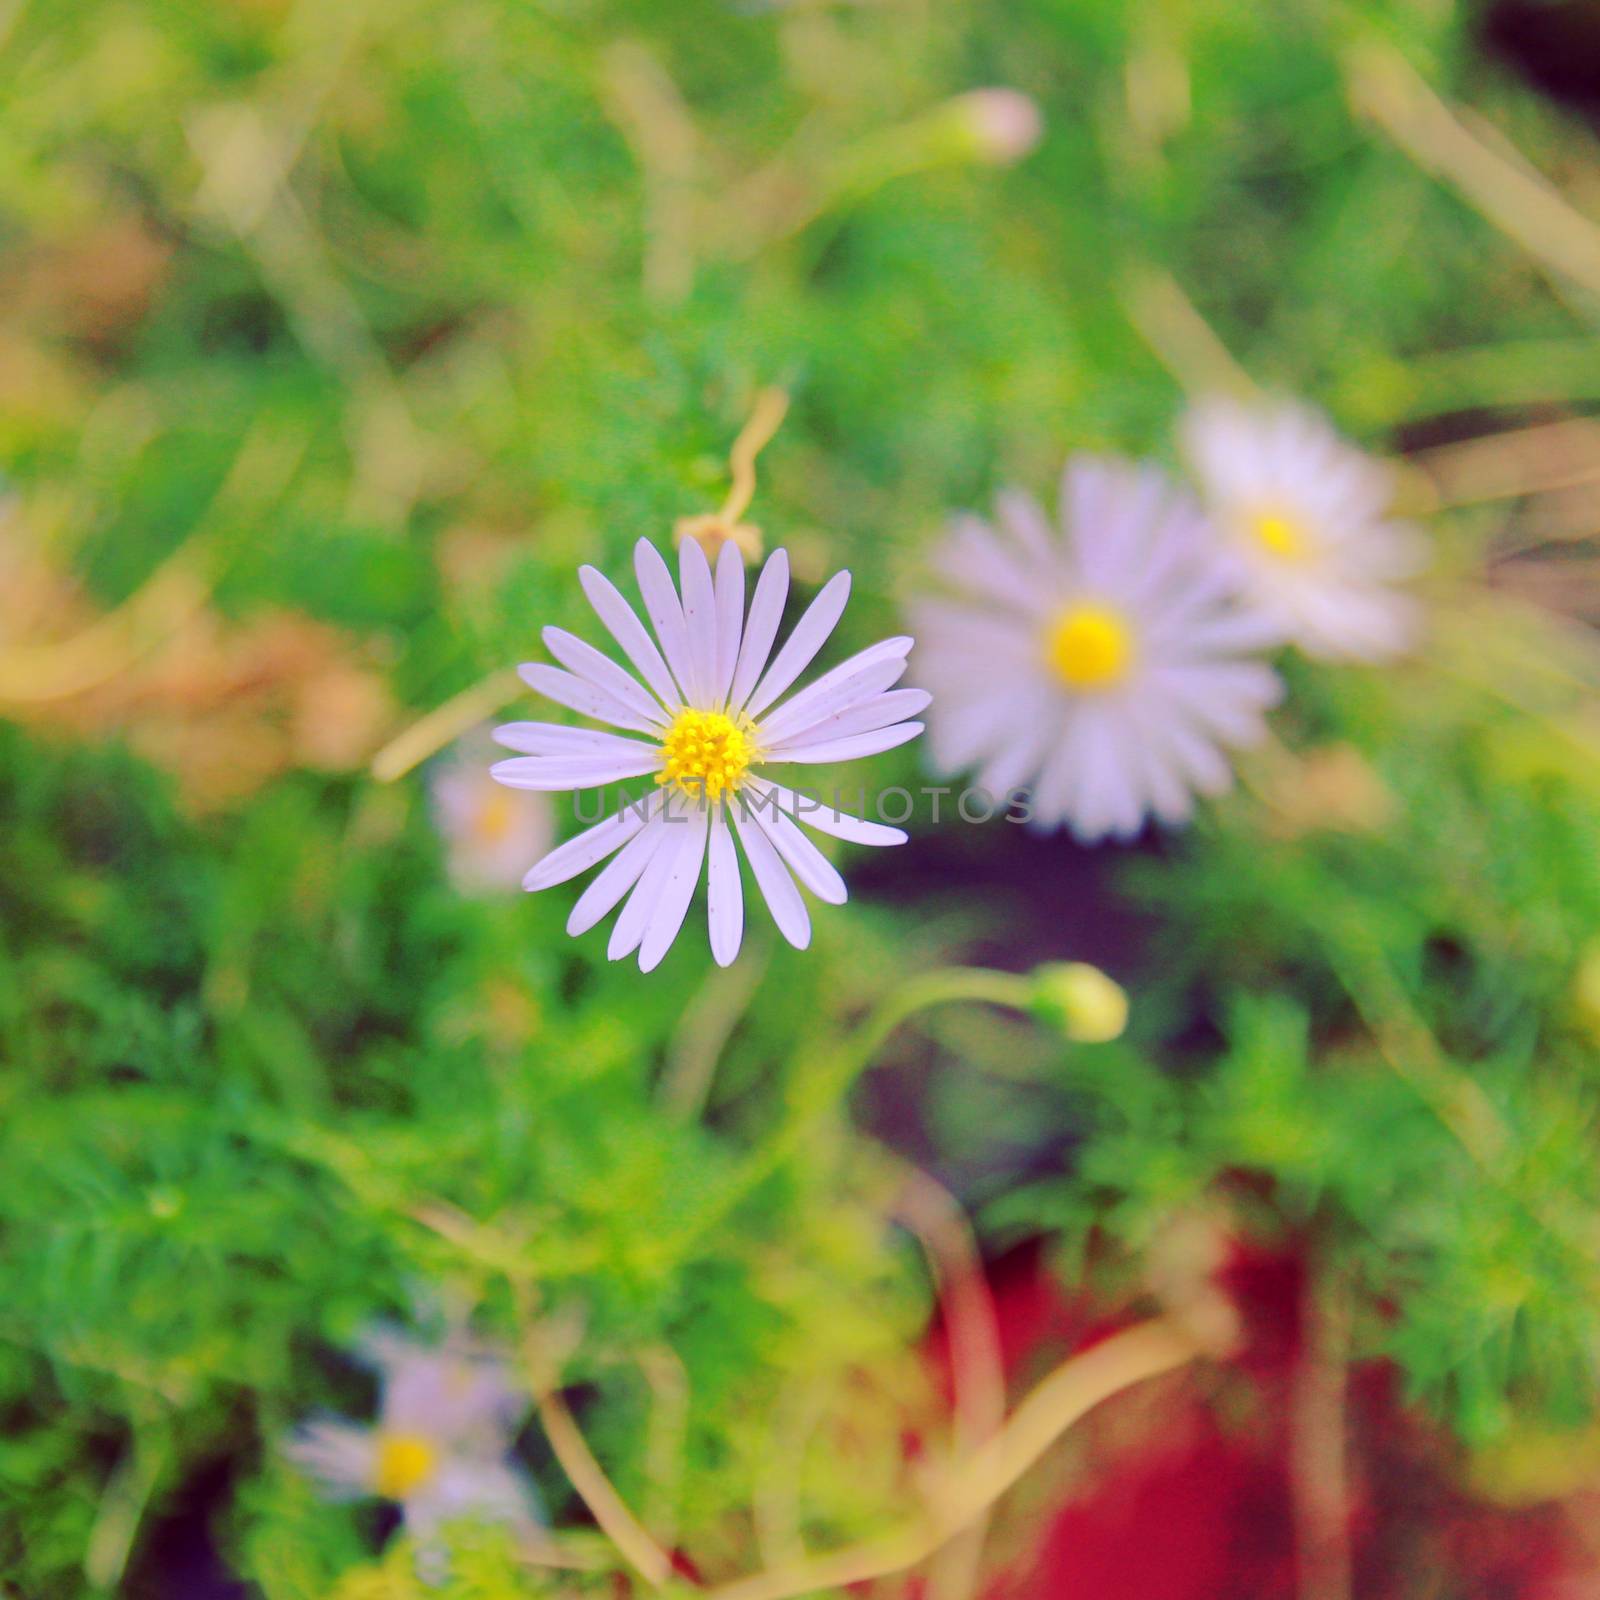 Daisy flowers in garden with retro filter effect by nuchylee